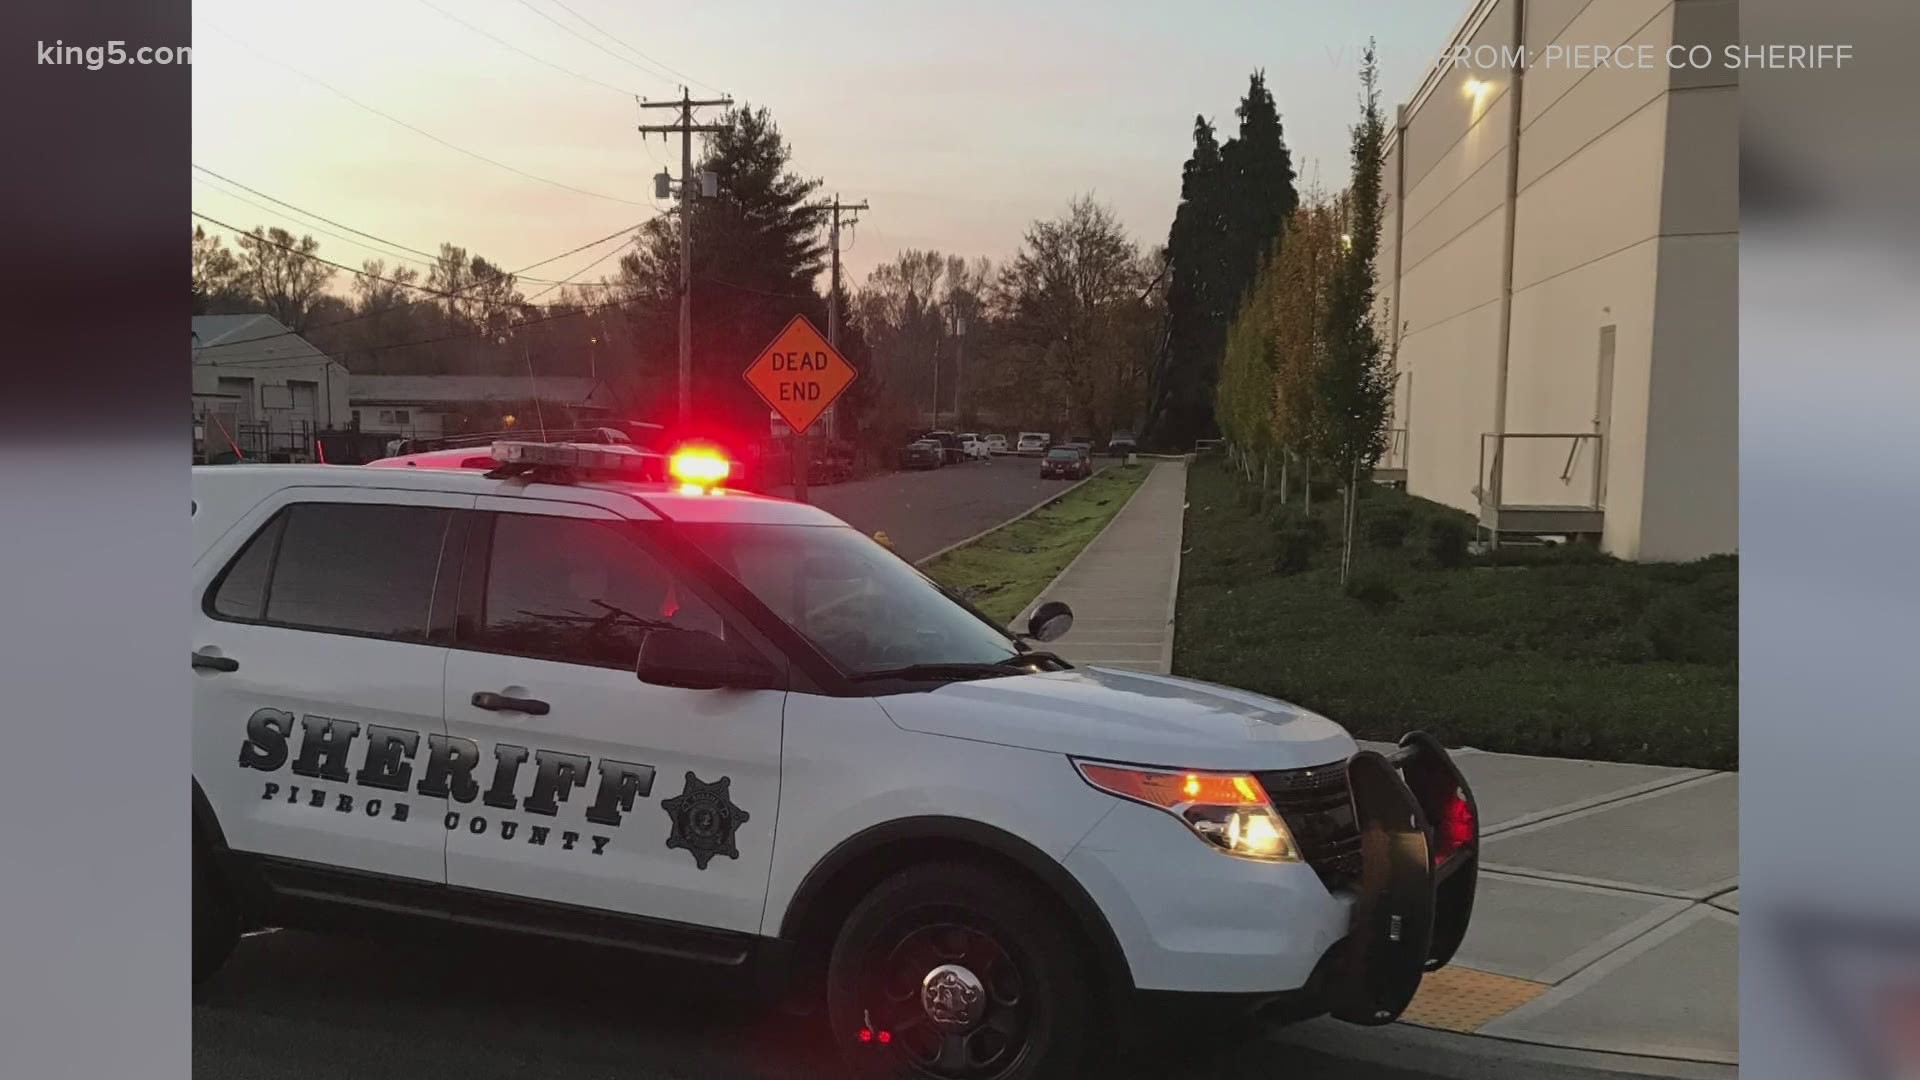 The Pierce County Sheriff's Department says five people were shot in the early morning hours Saturday at a Halloween party in Sumner. The suspect is still at large.